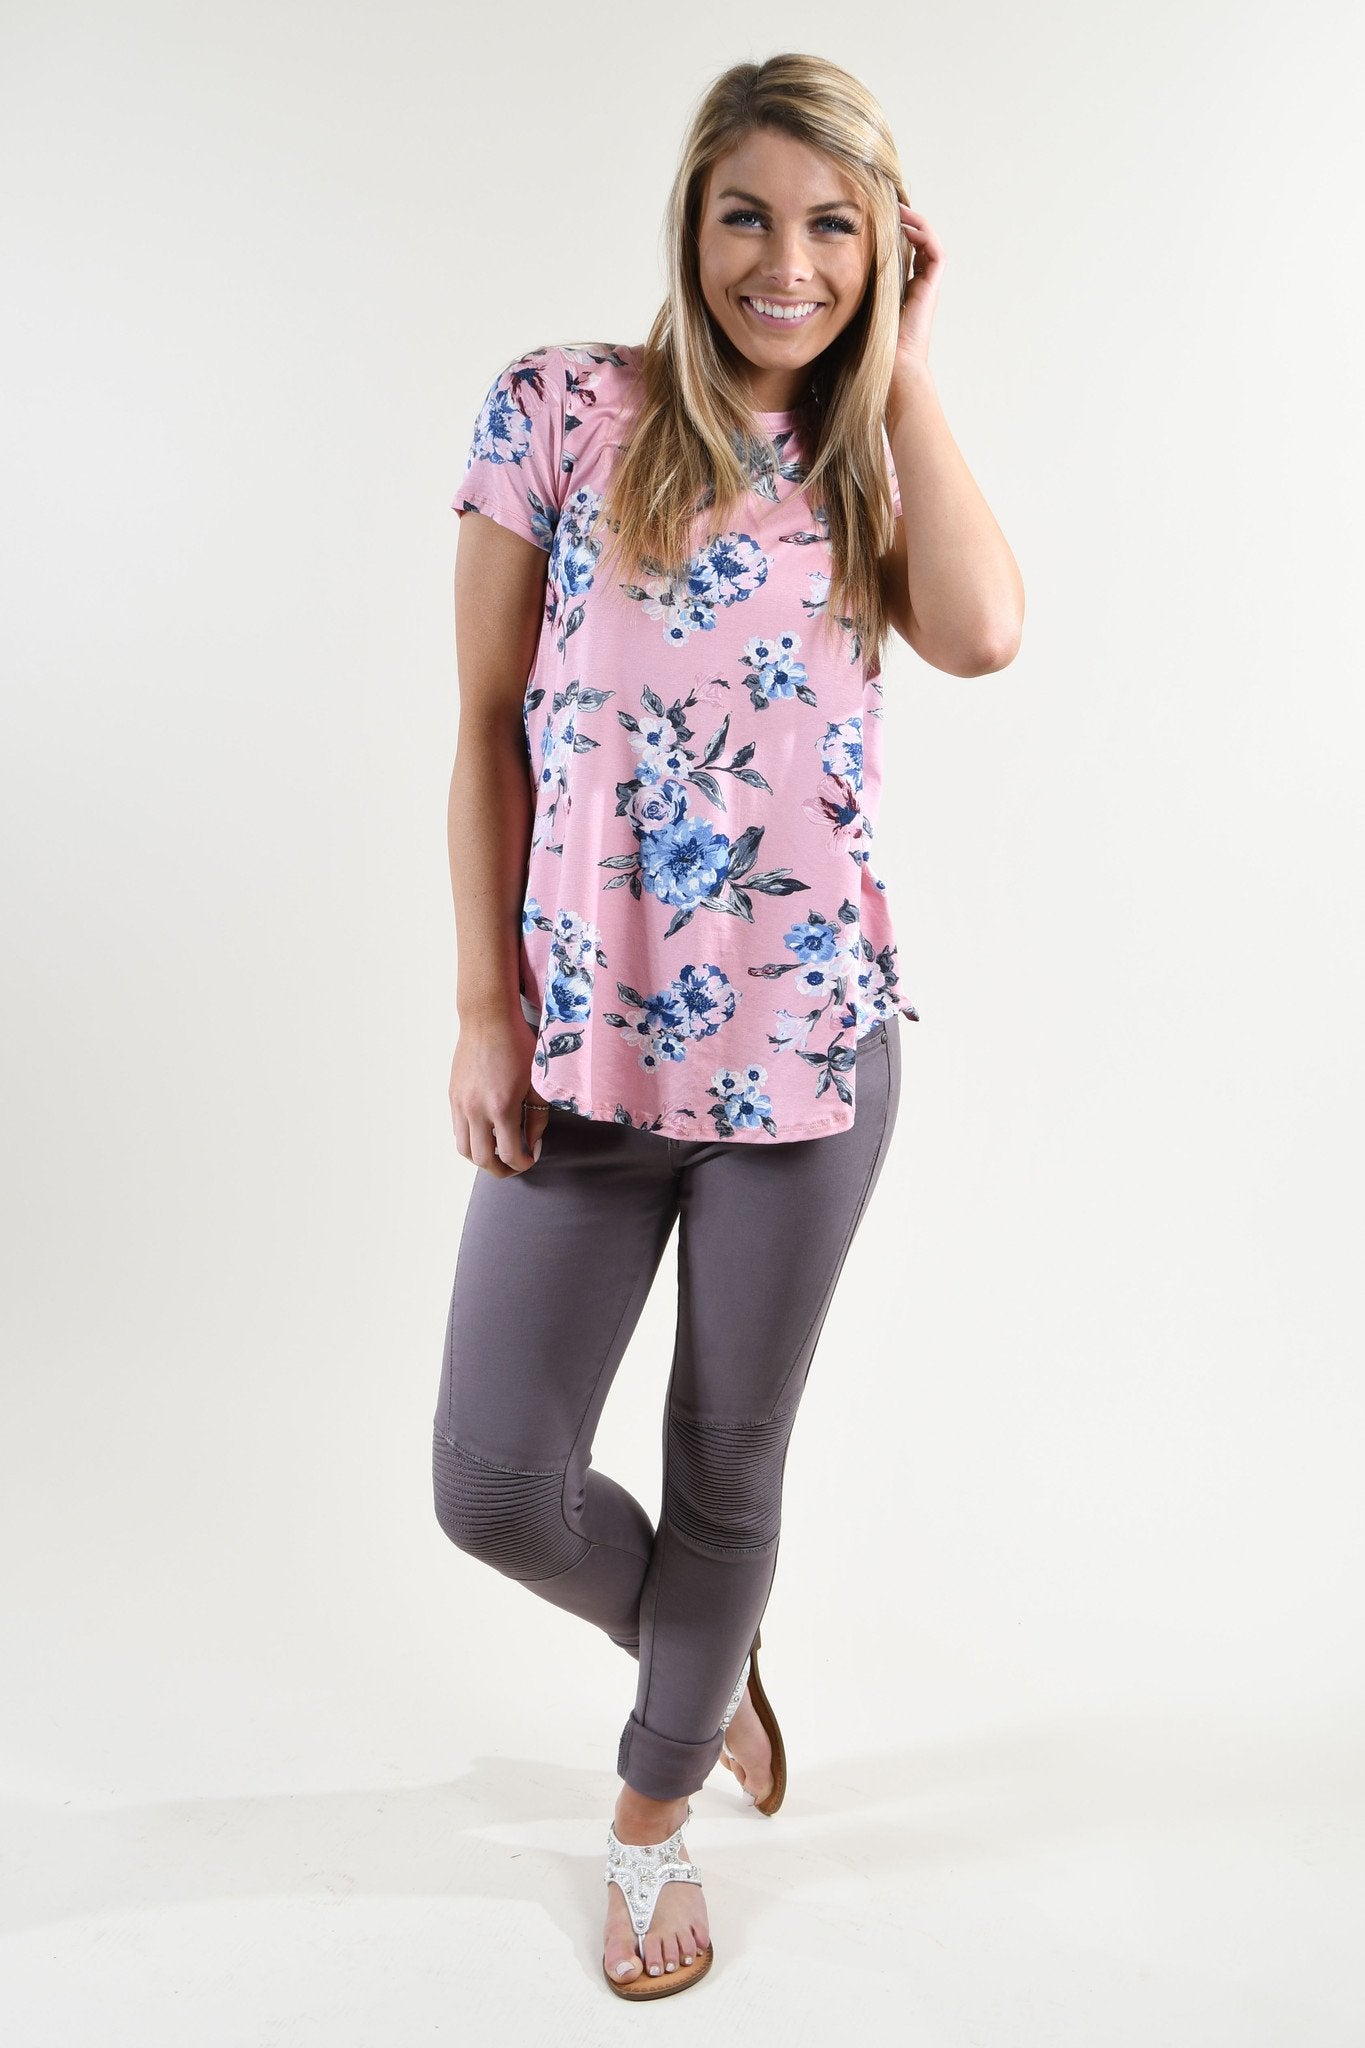 Lost in You Pink Floral Top